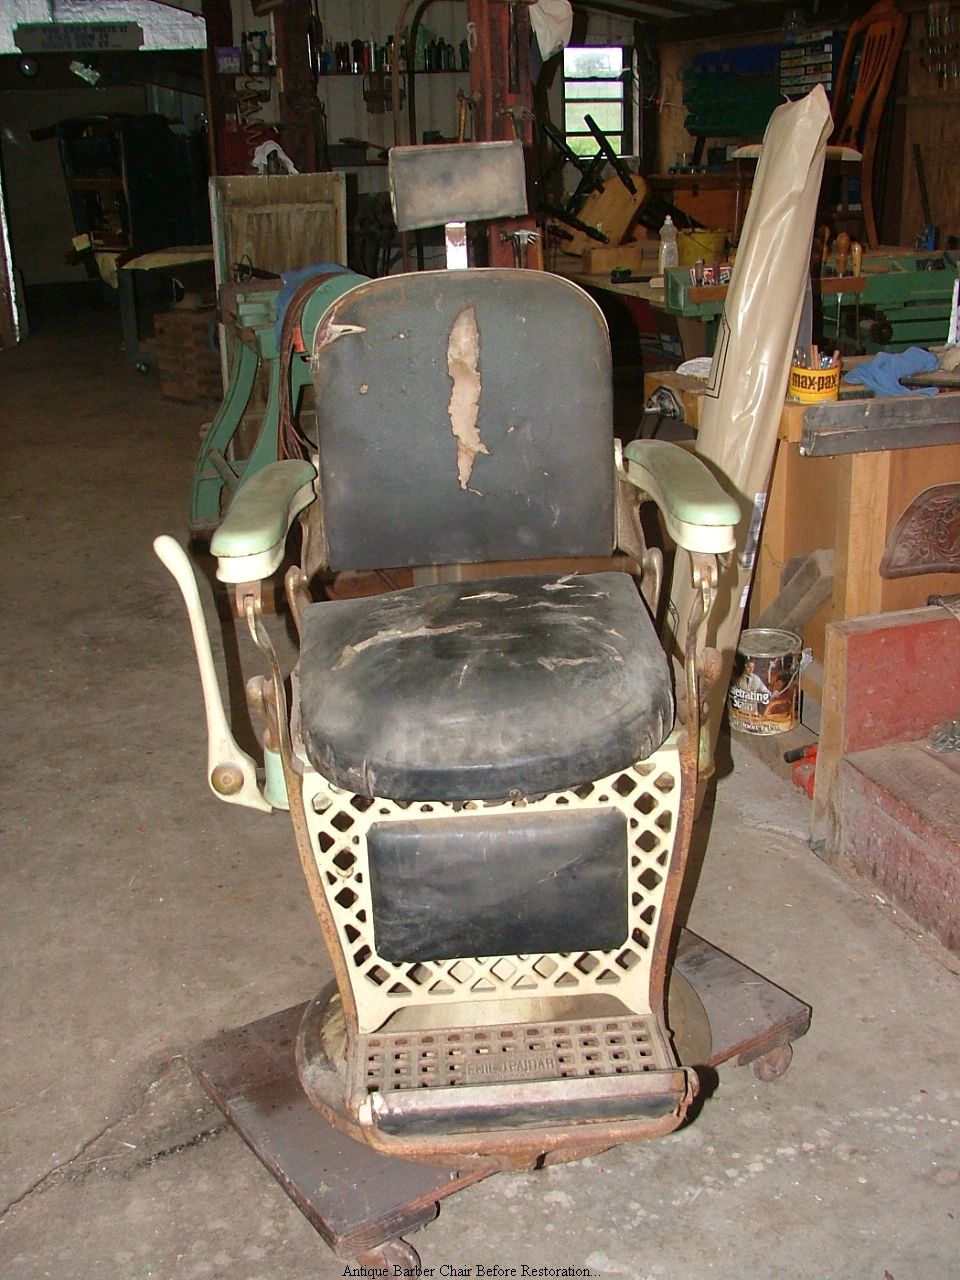 Antique Barber Chair Before Restoration